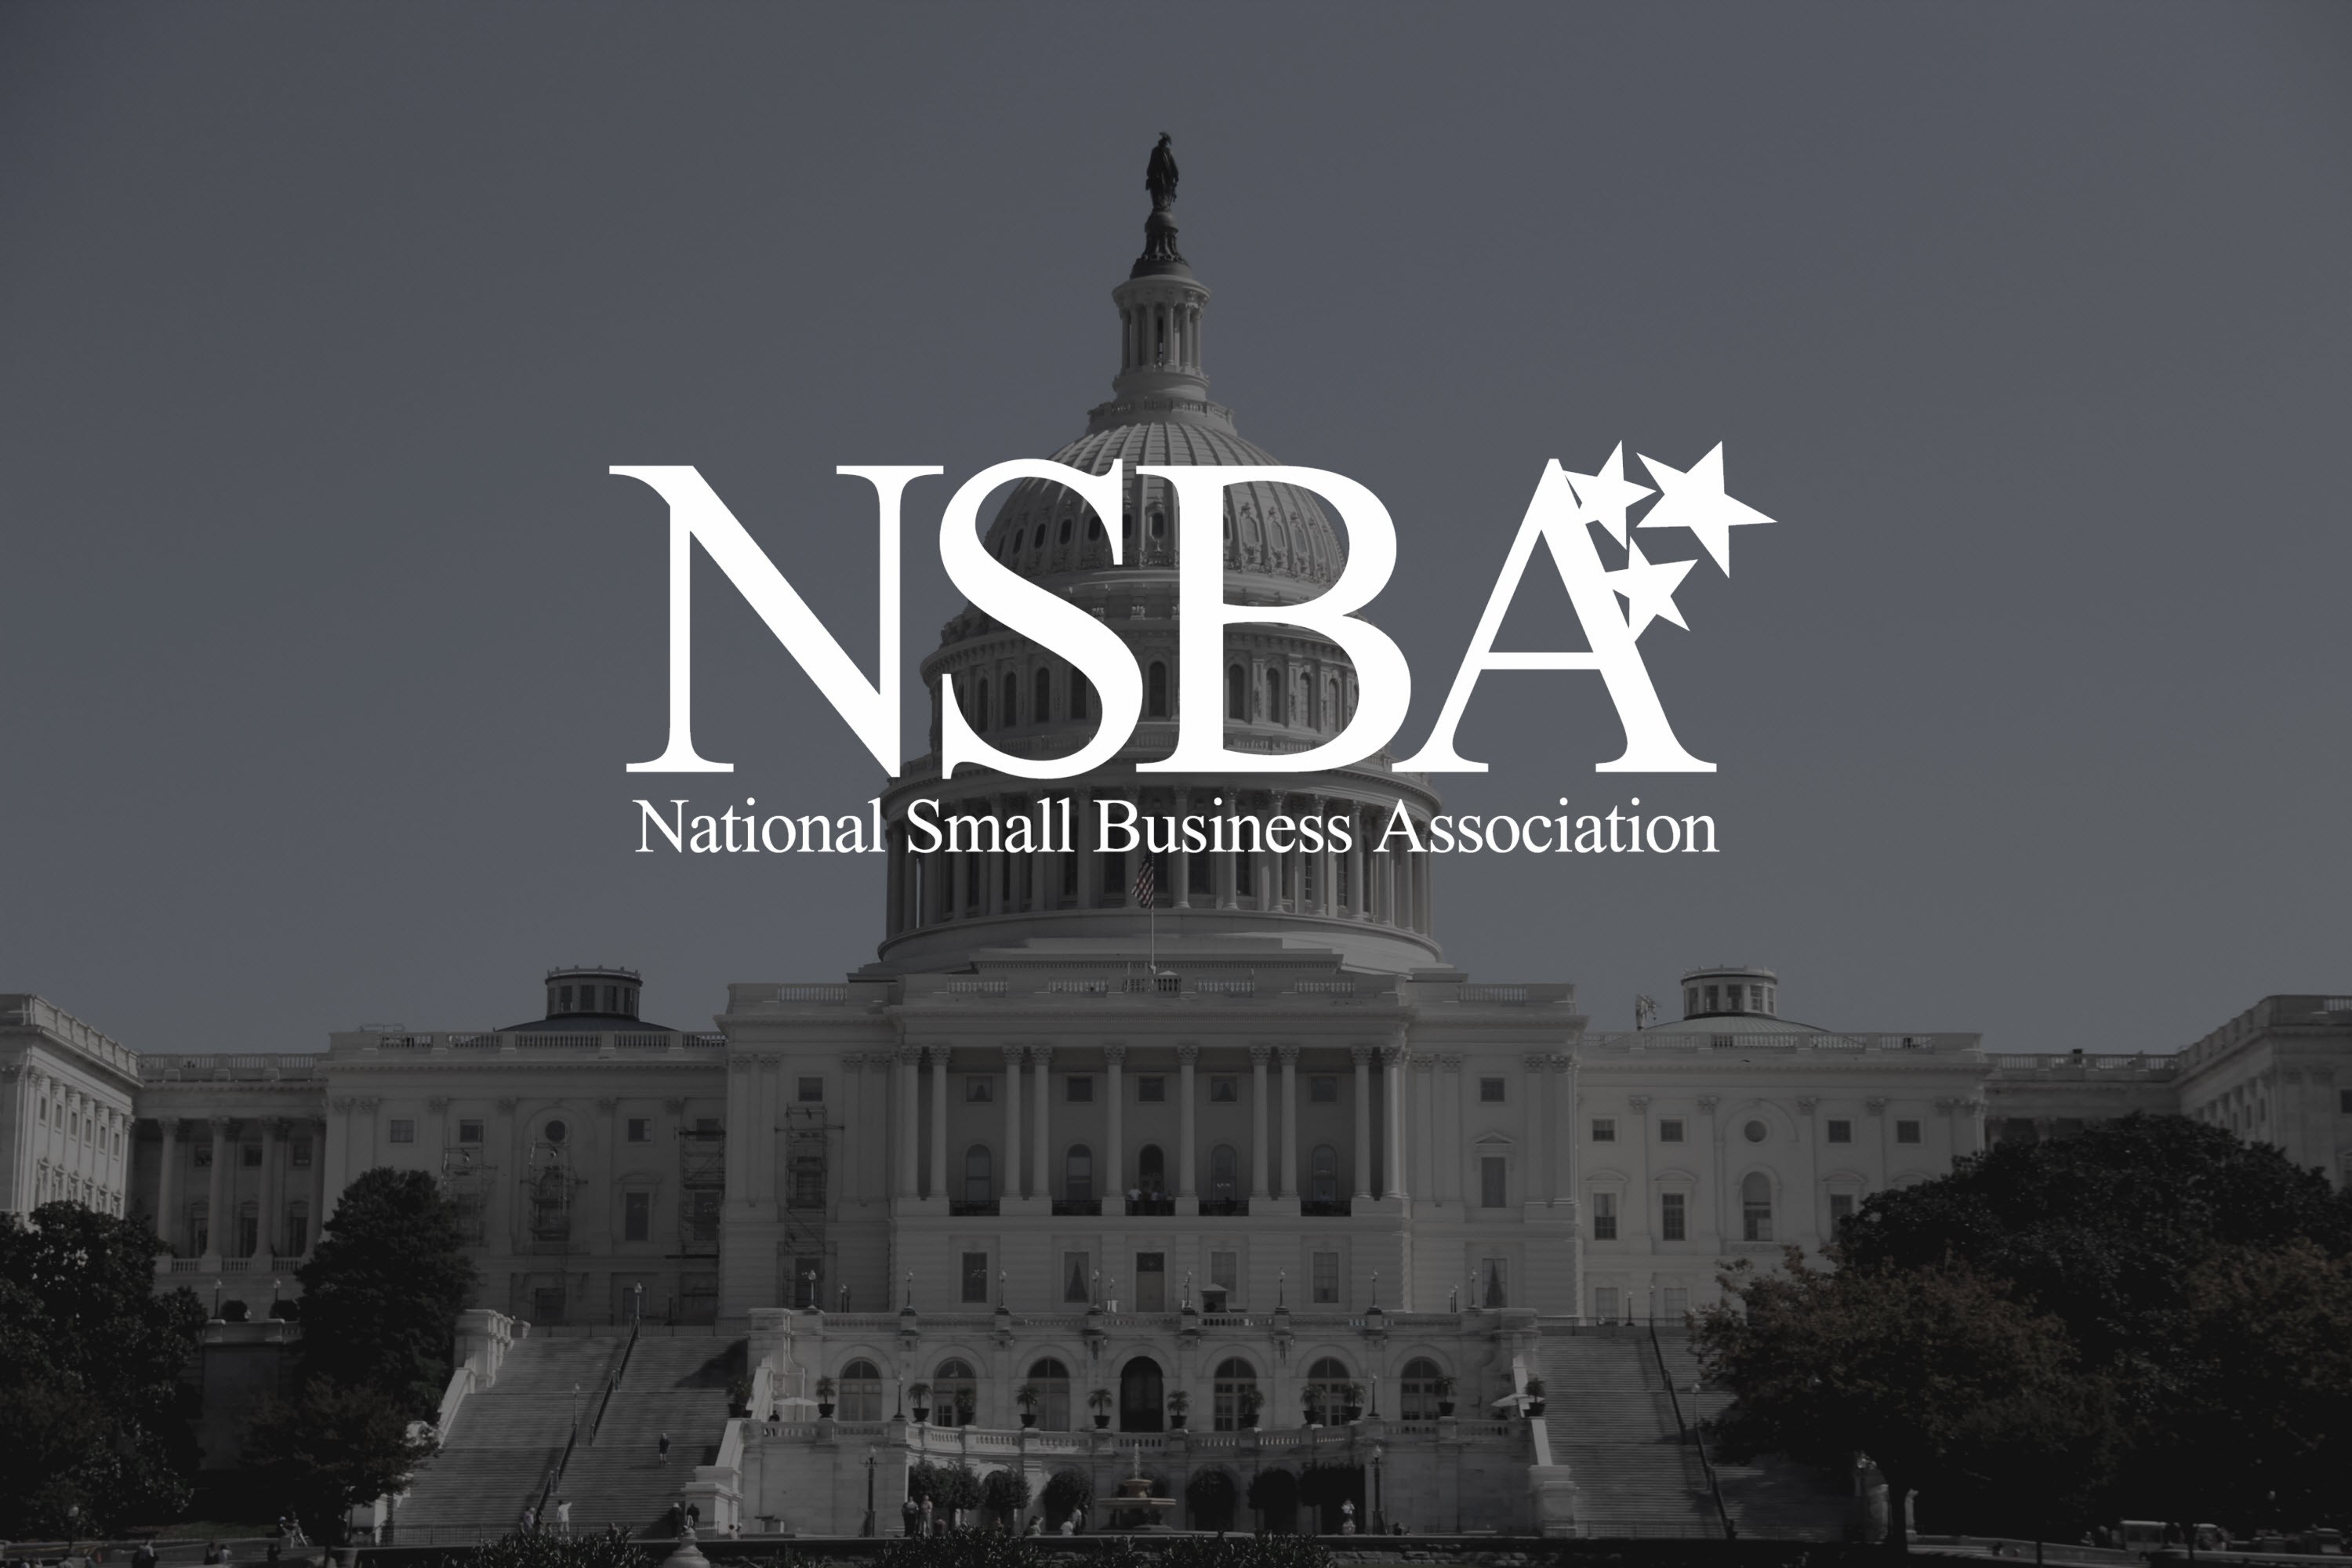 The National Small Business Association logo overtop of the US Capitol.